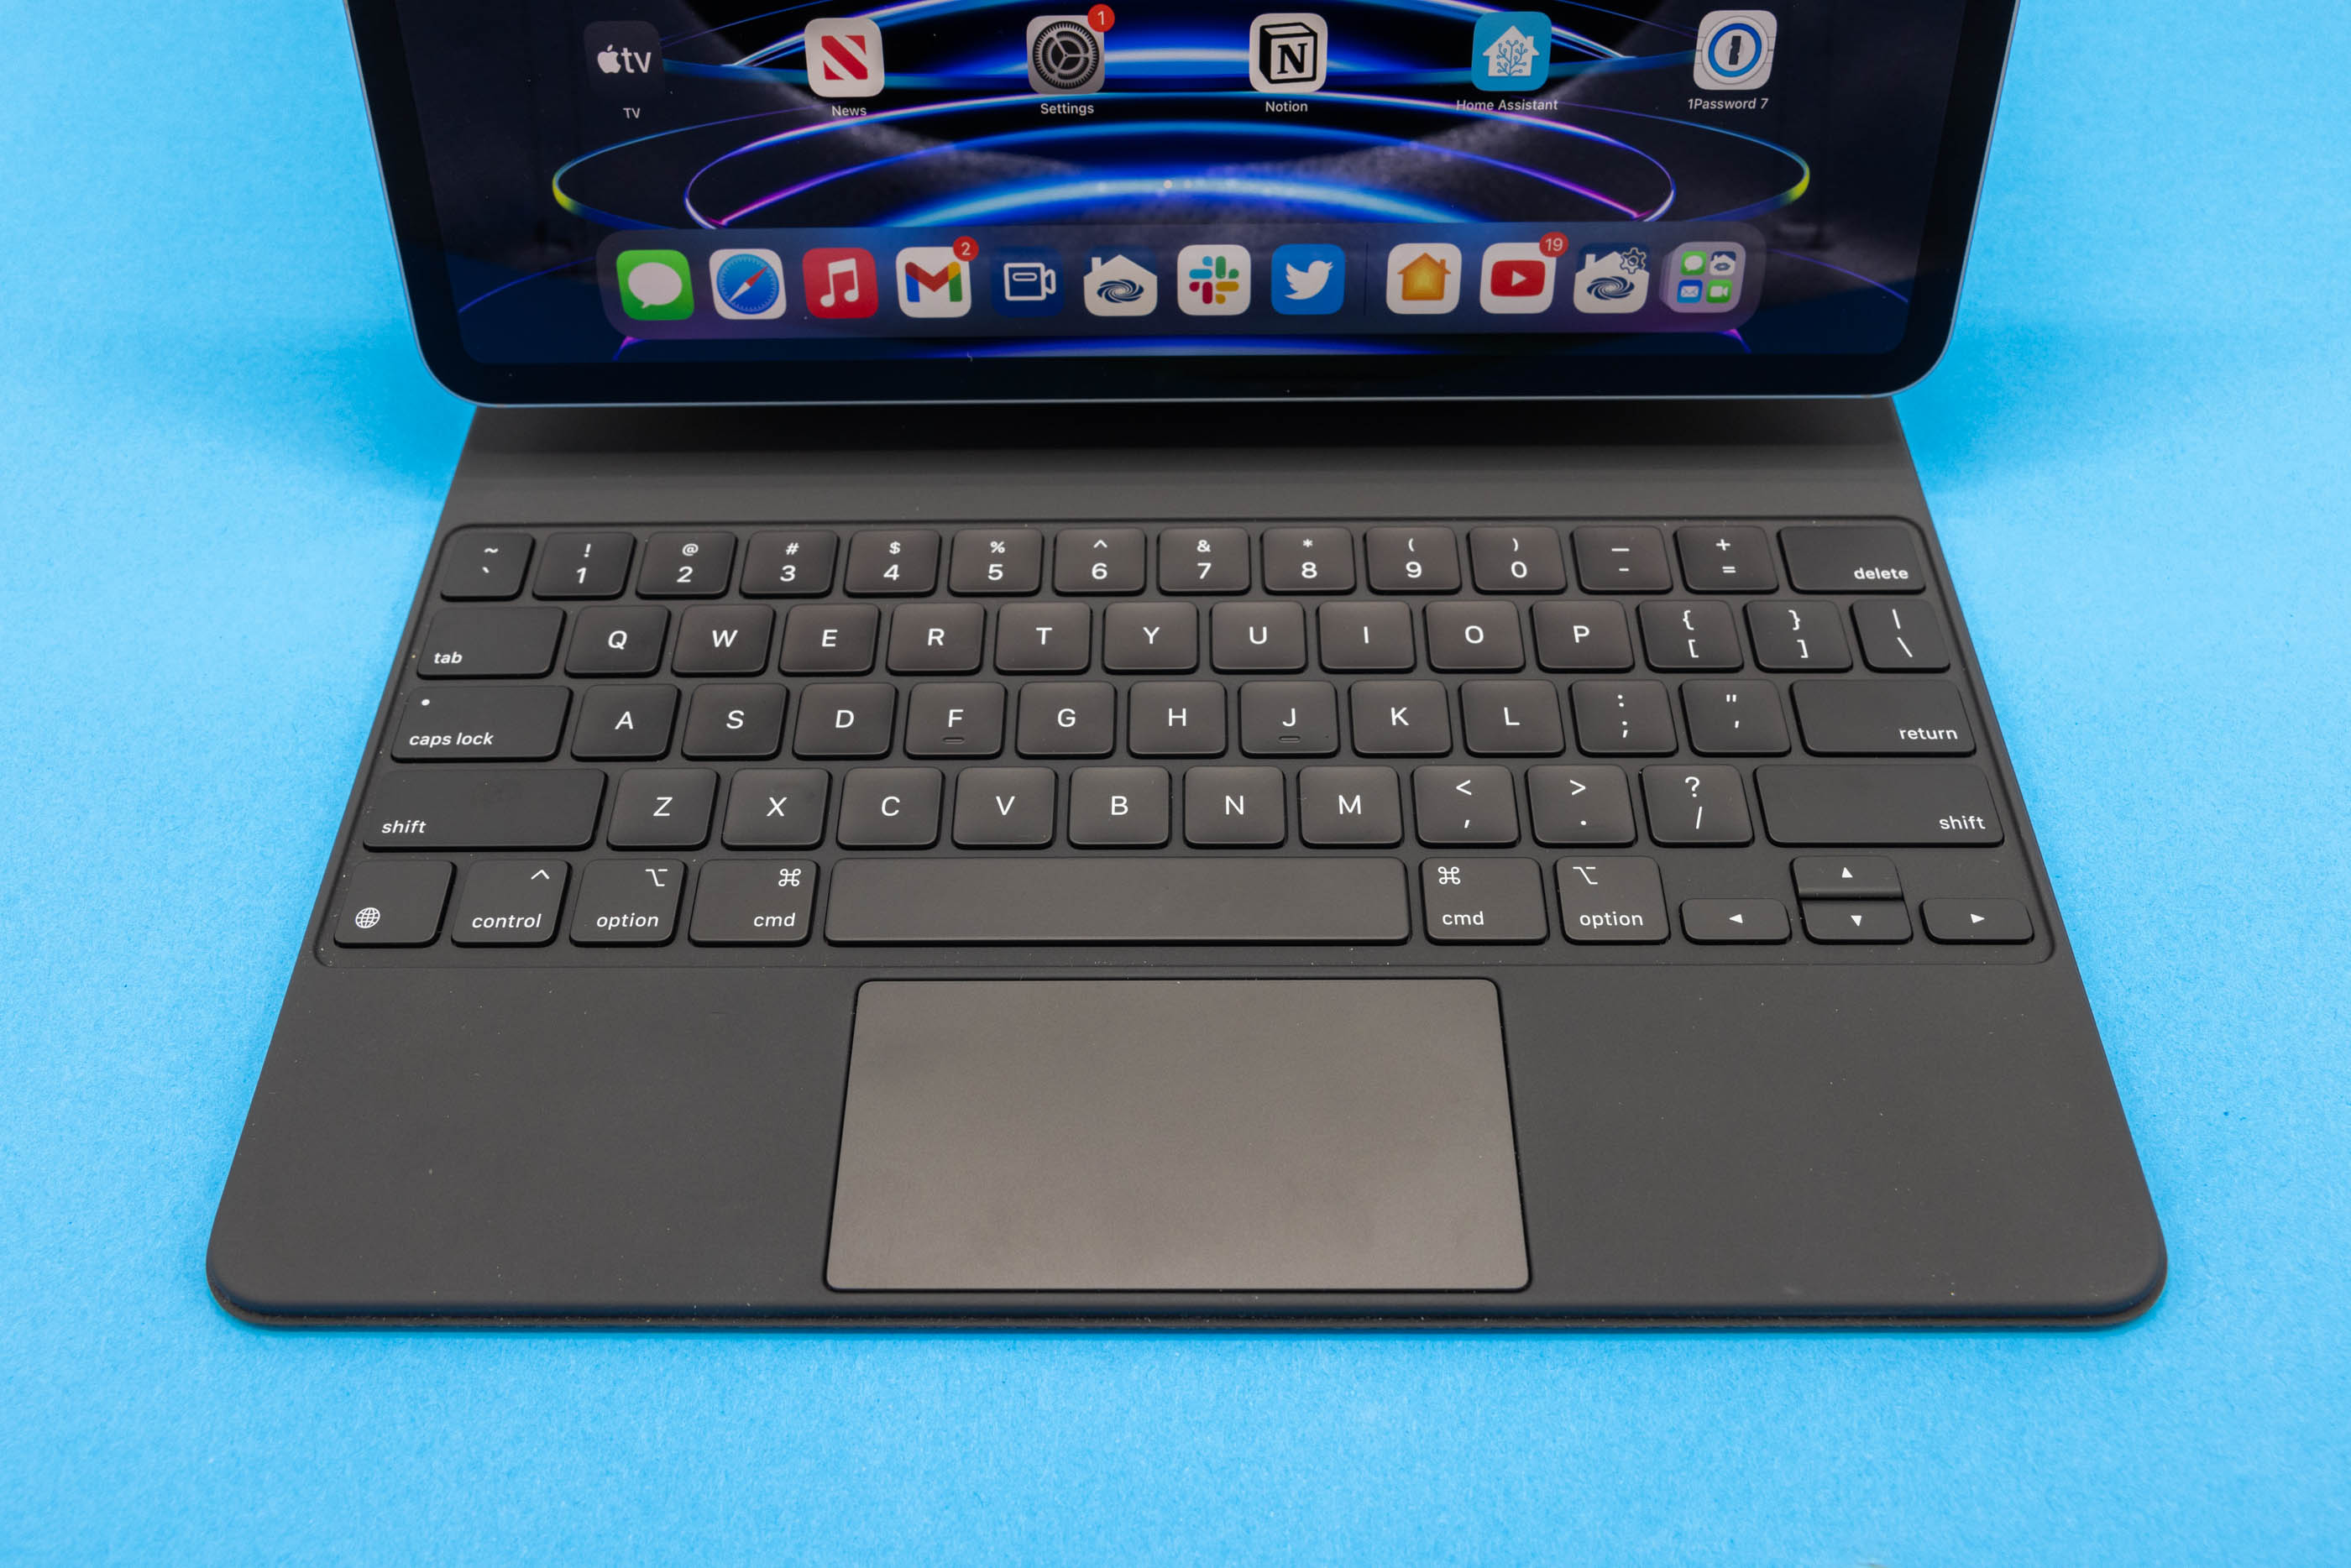 A new Magic Keyboard might not solve iPad Pro’s biggest problems